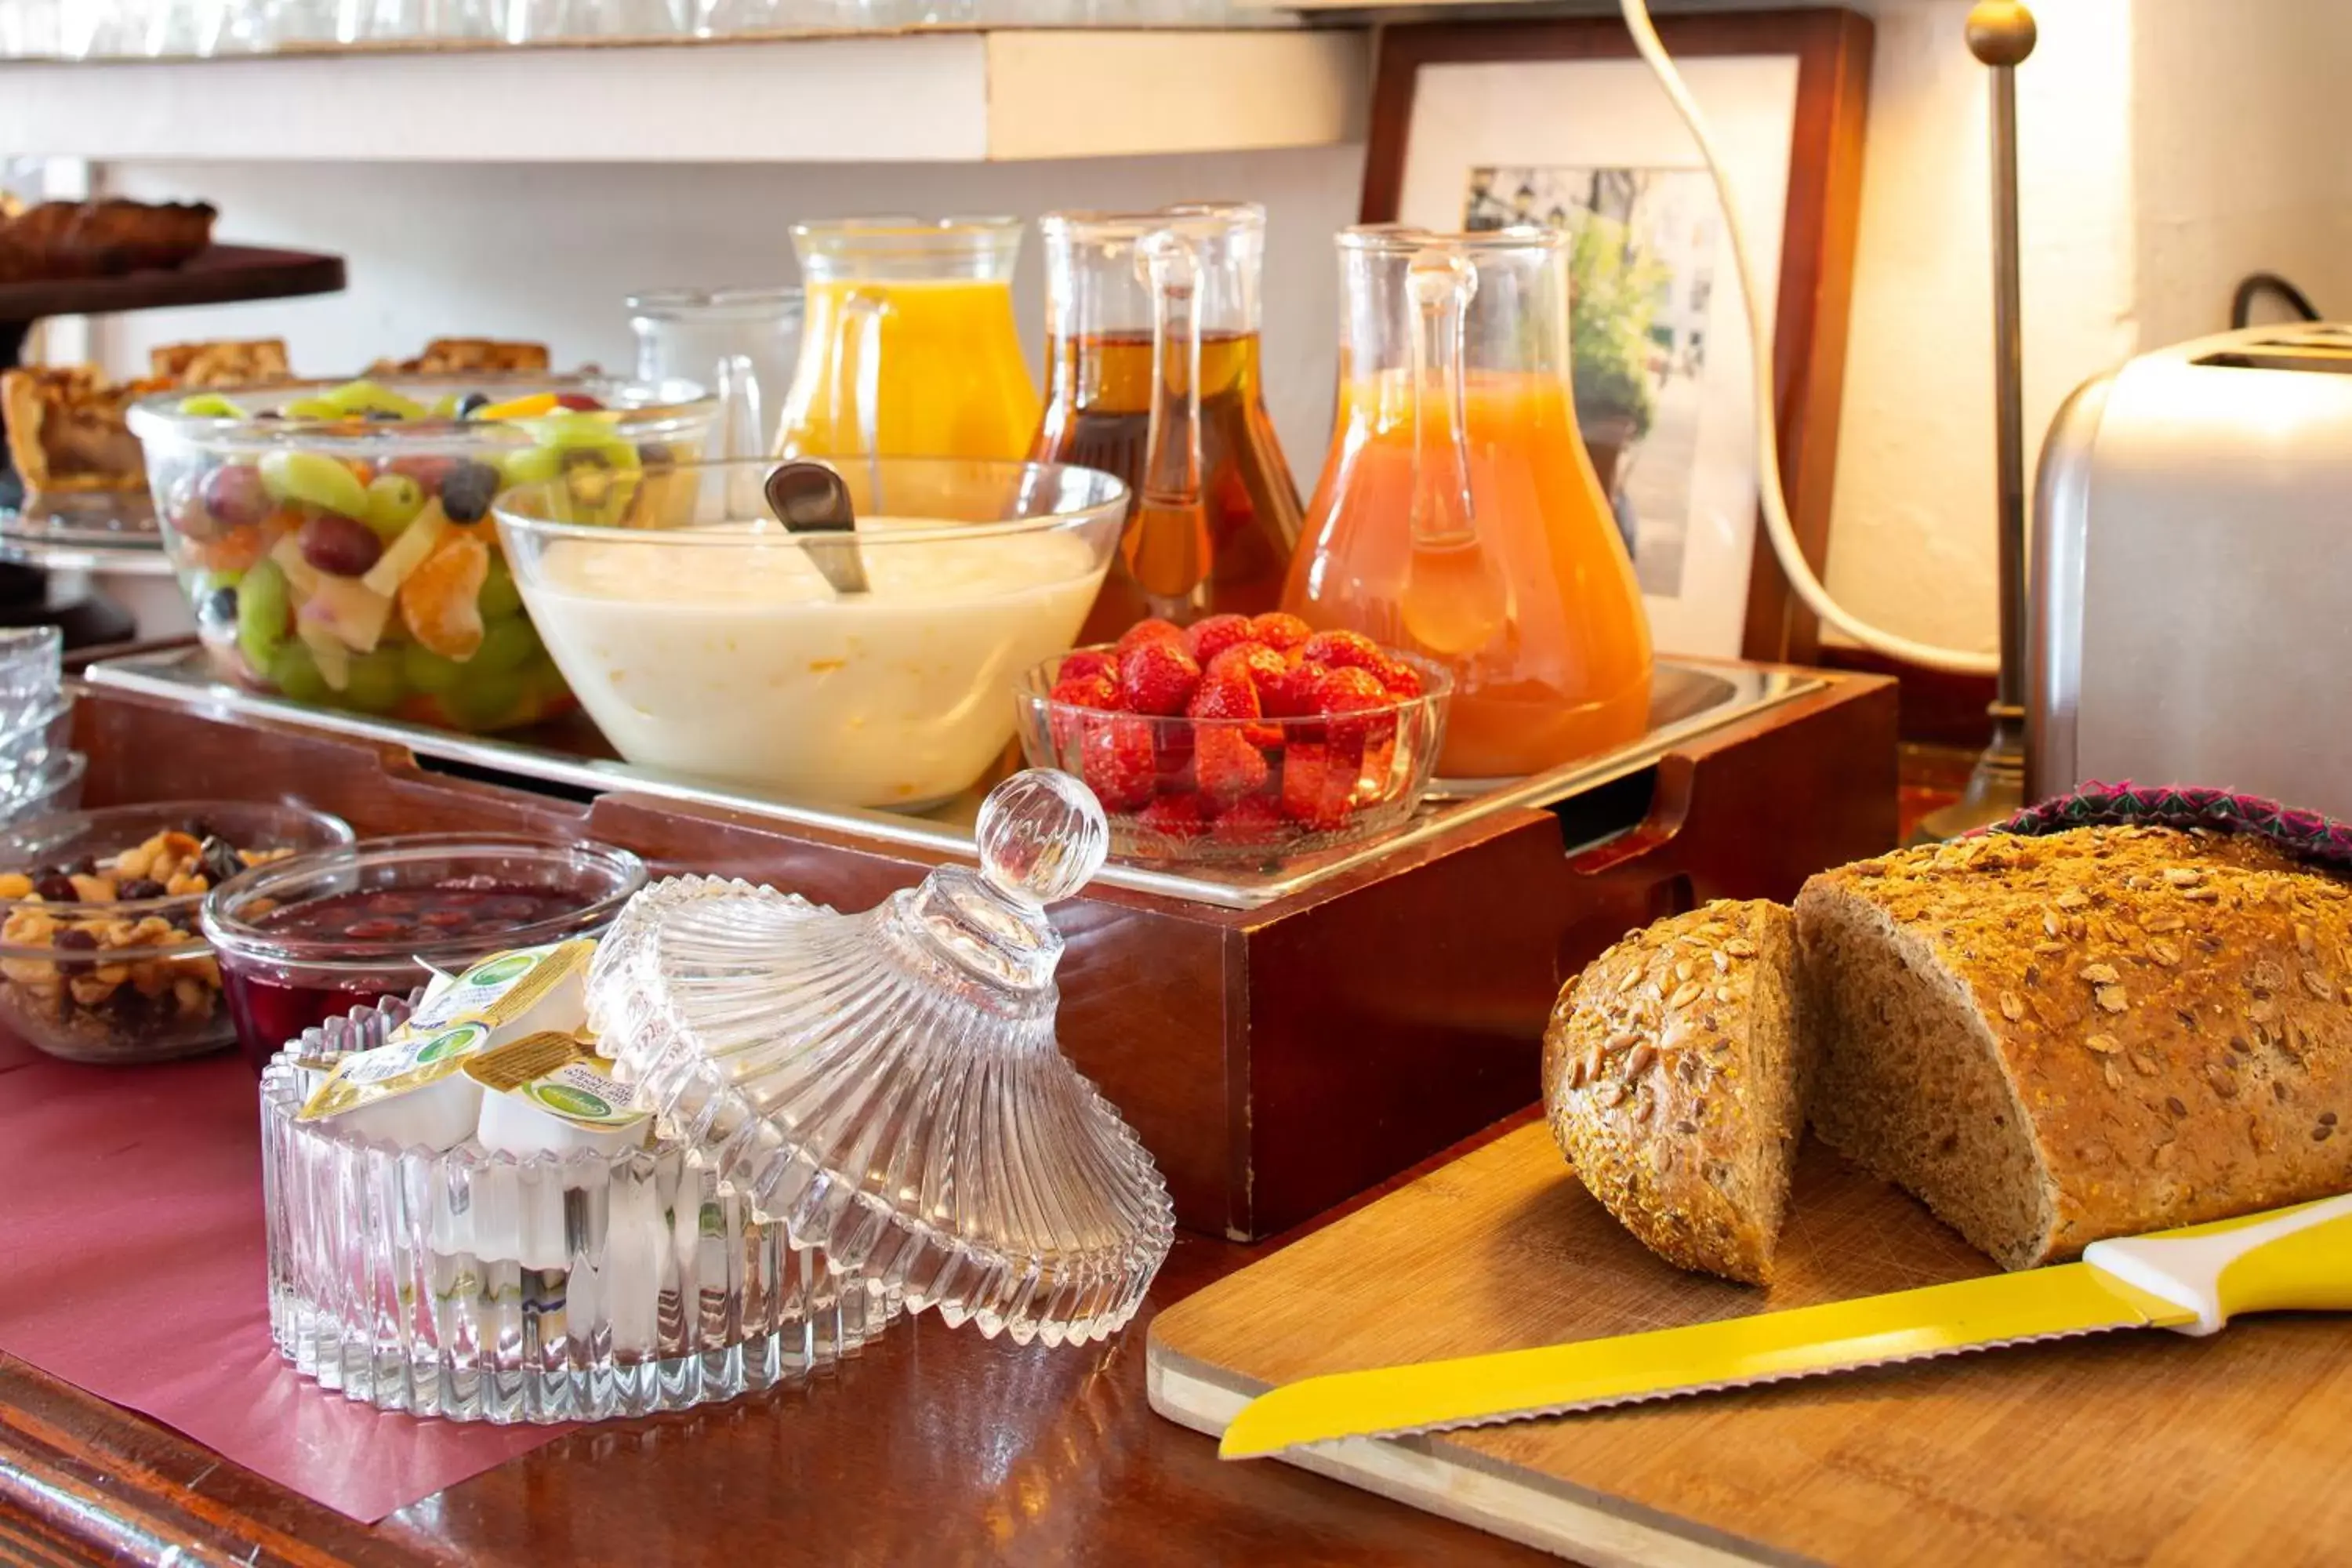 Food and drinks, Breakfast in Amsterdam House Hotel